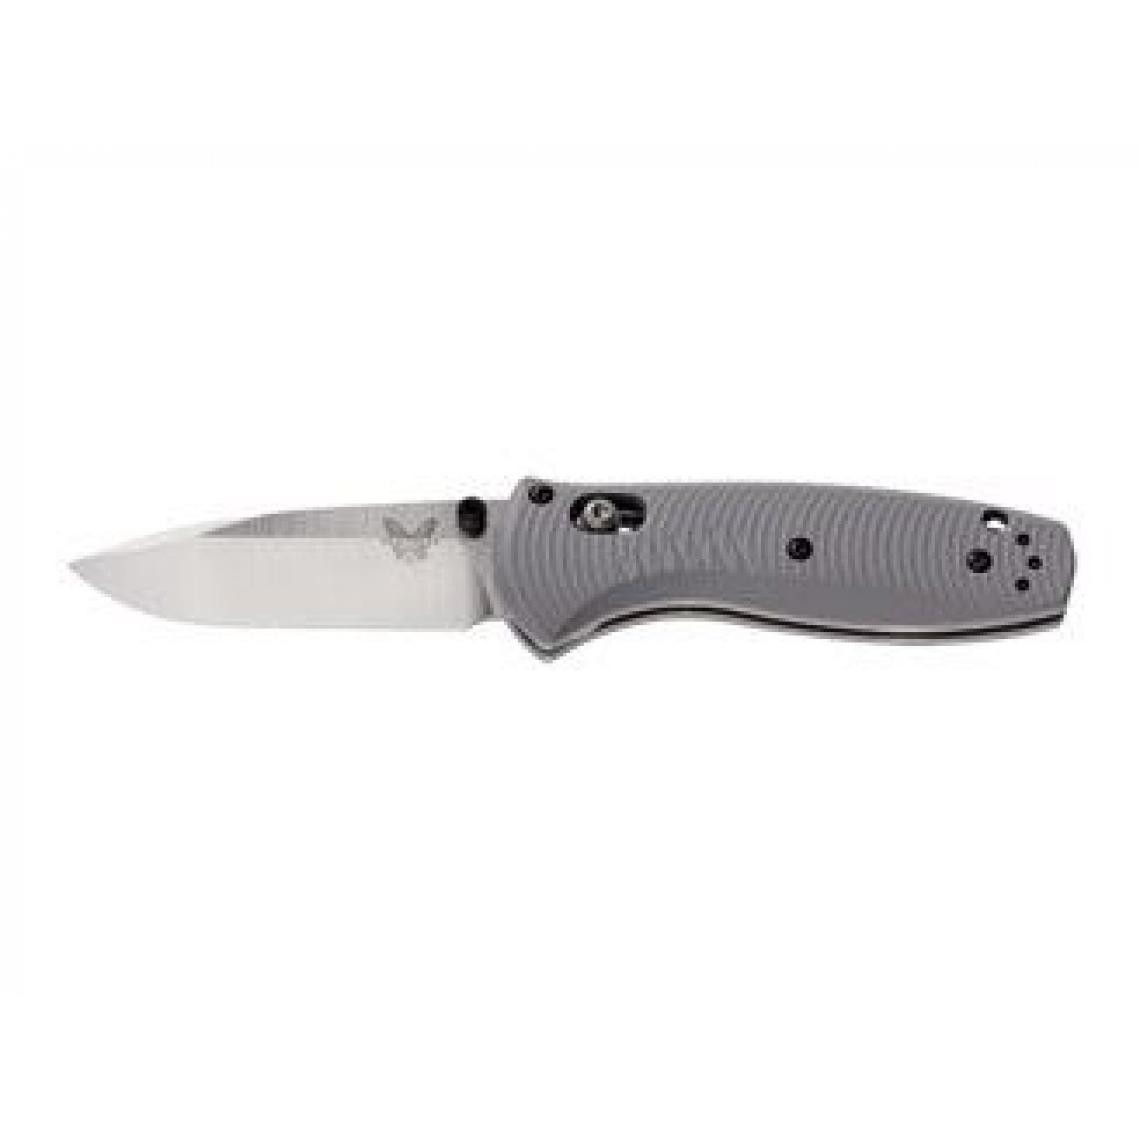 Divers Marques - Benchmade MINI BARRAGE 585-2 G10 - Outils de coupe